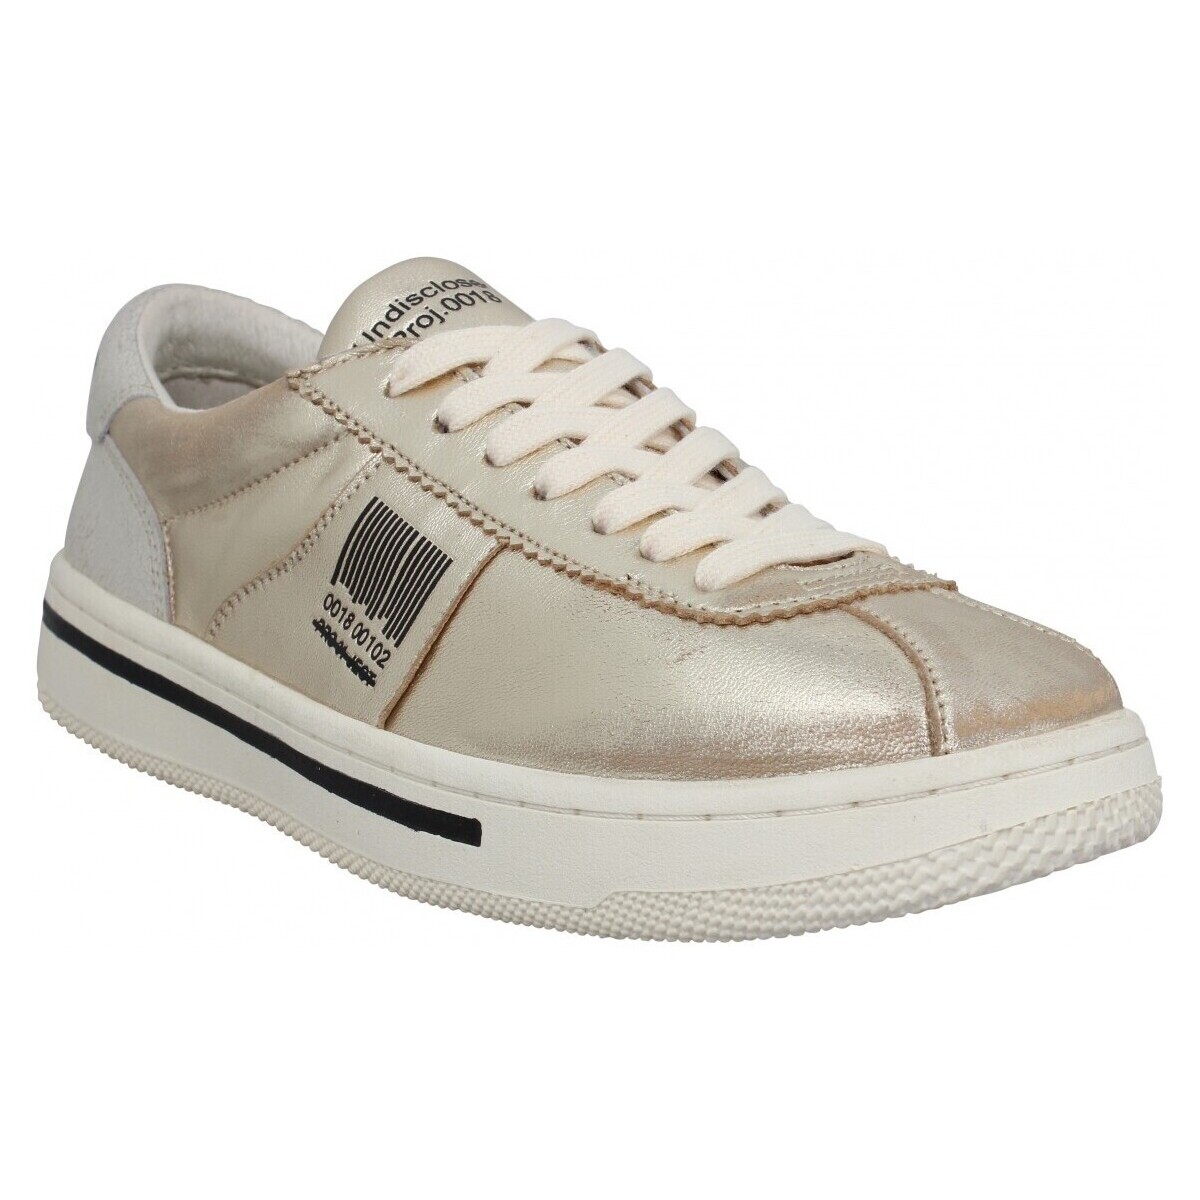 Sneakers Pro 01 Ject P5lw Cuir Laminated Femme Platinium